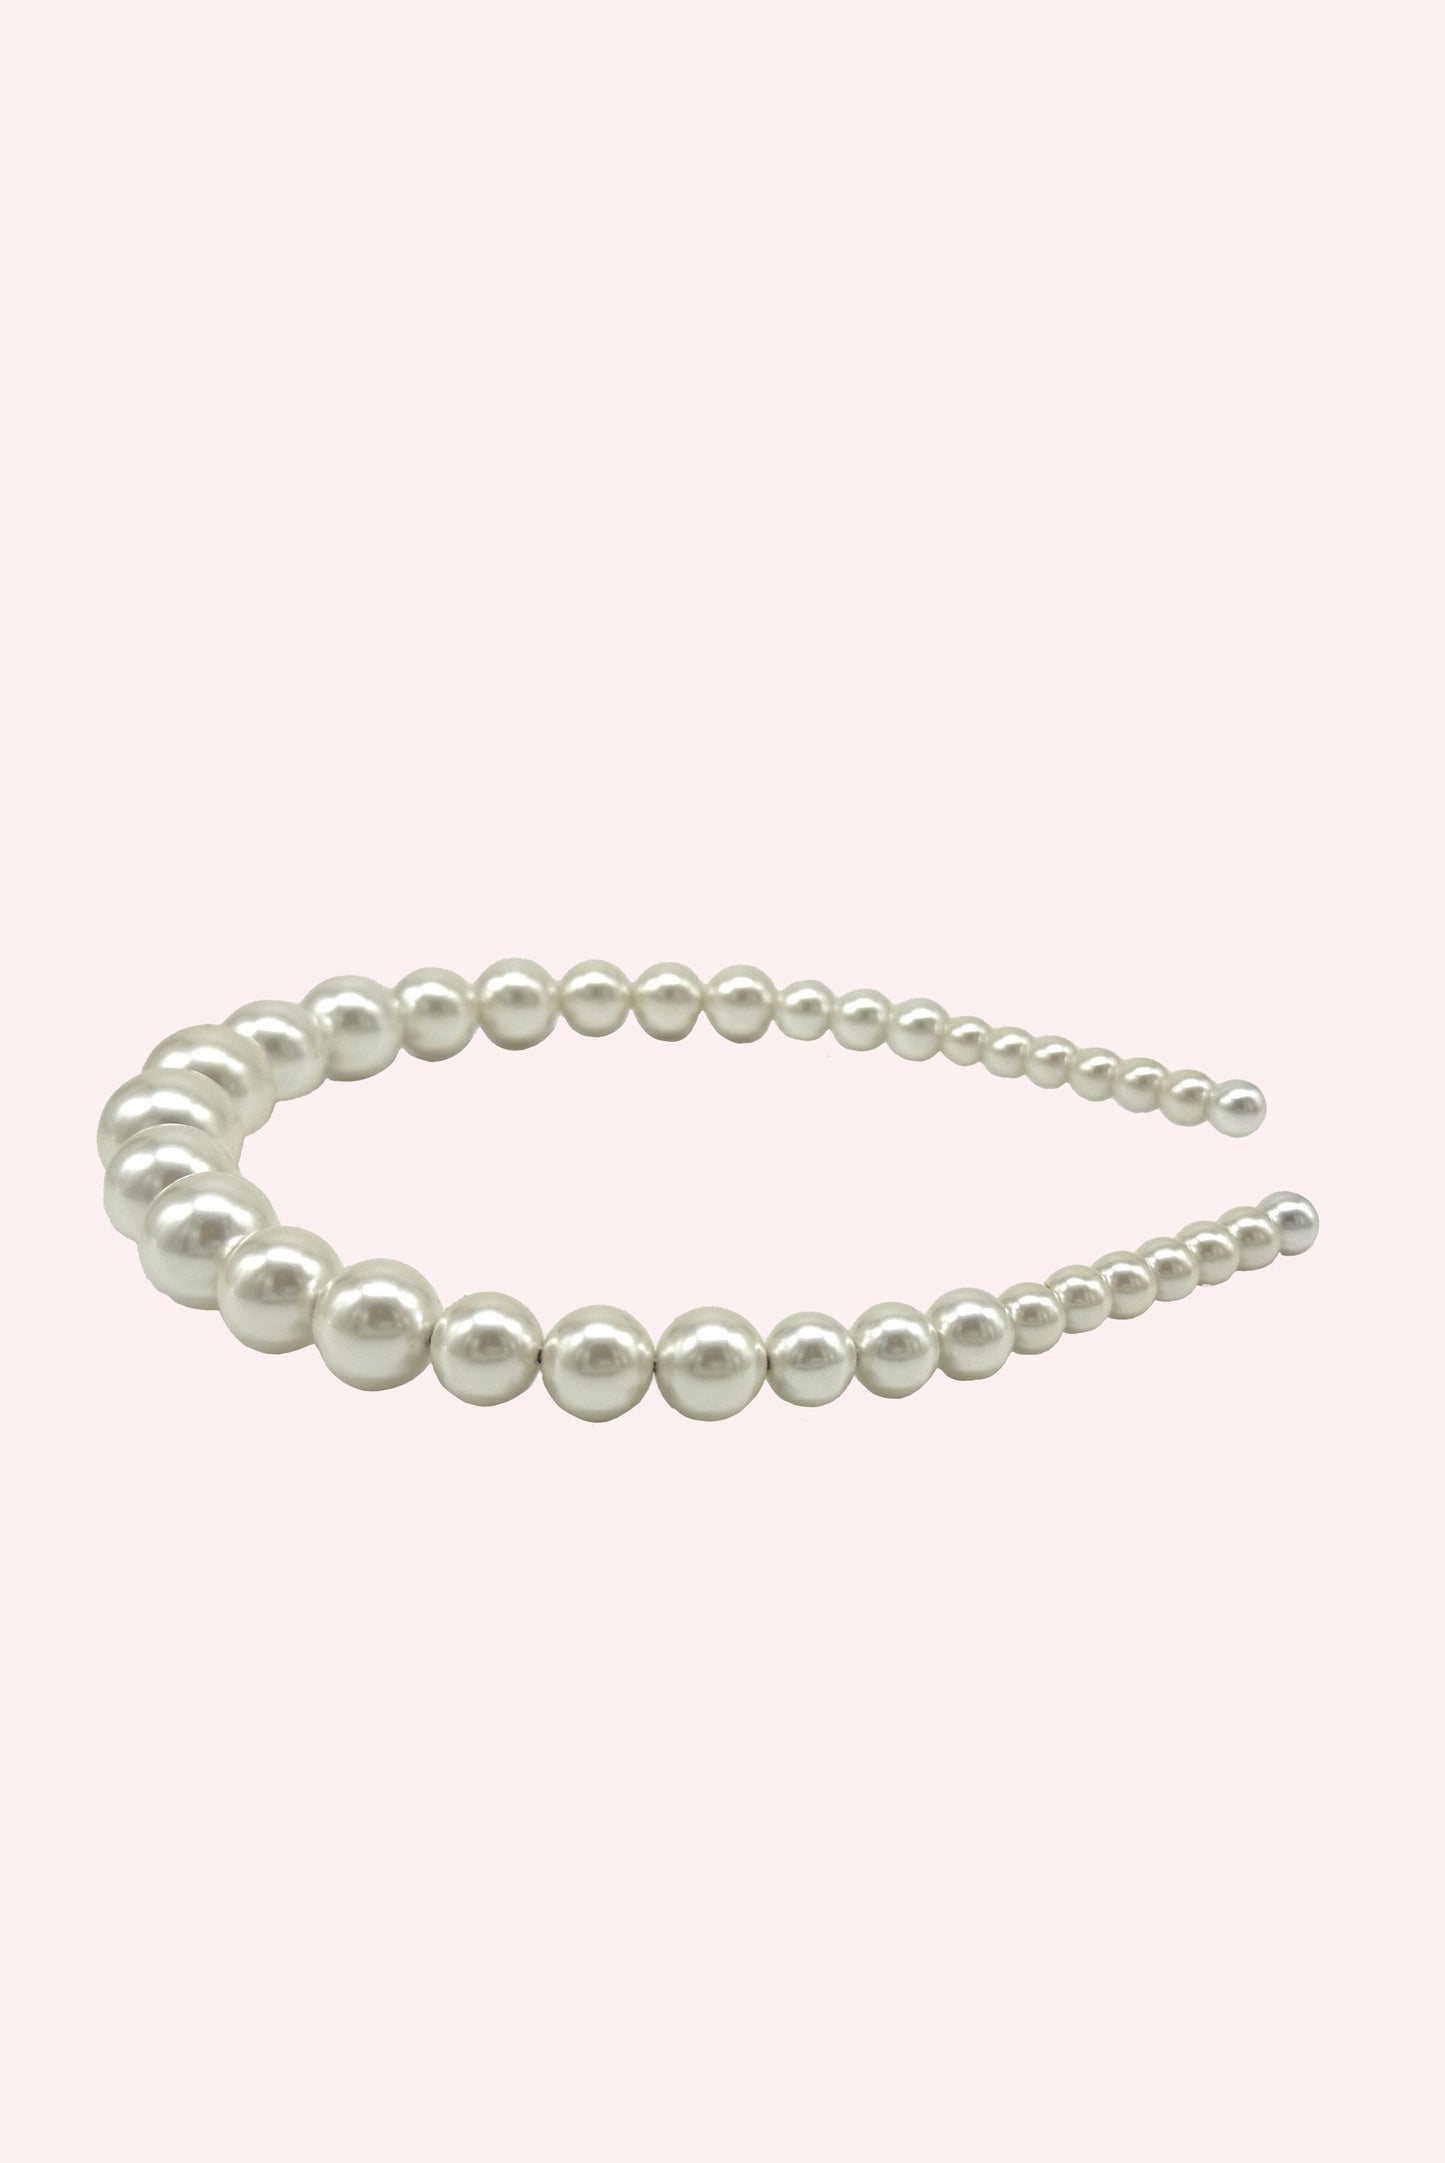 30ish Pearls Headband, large pearl middle of the open circle going to smallest one on each ends